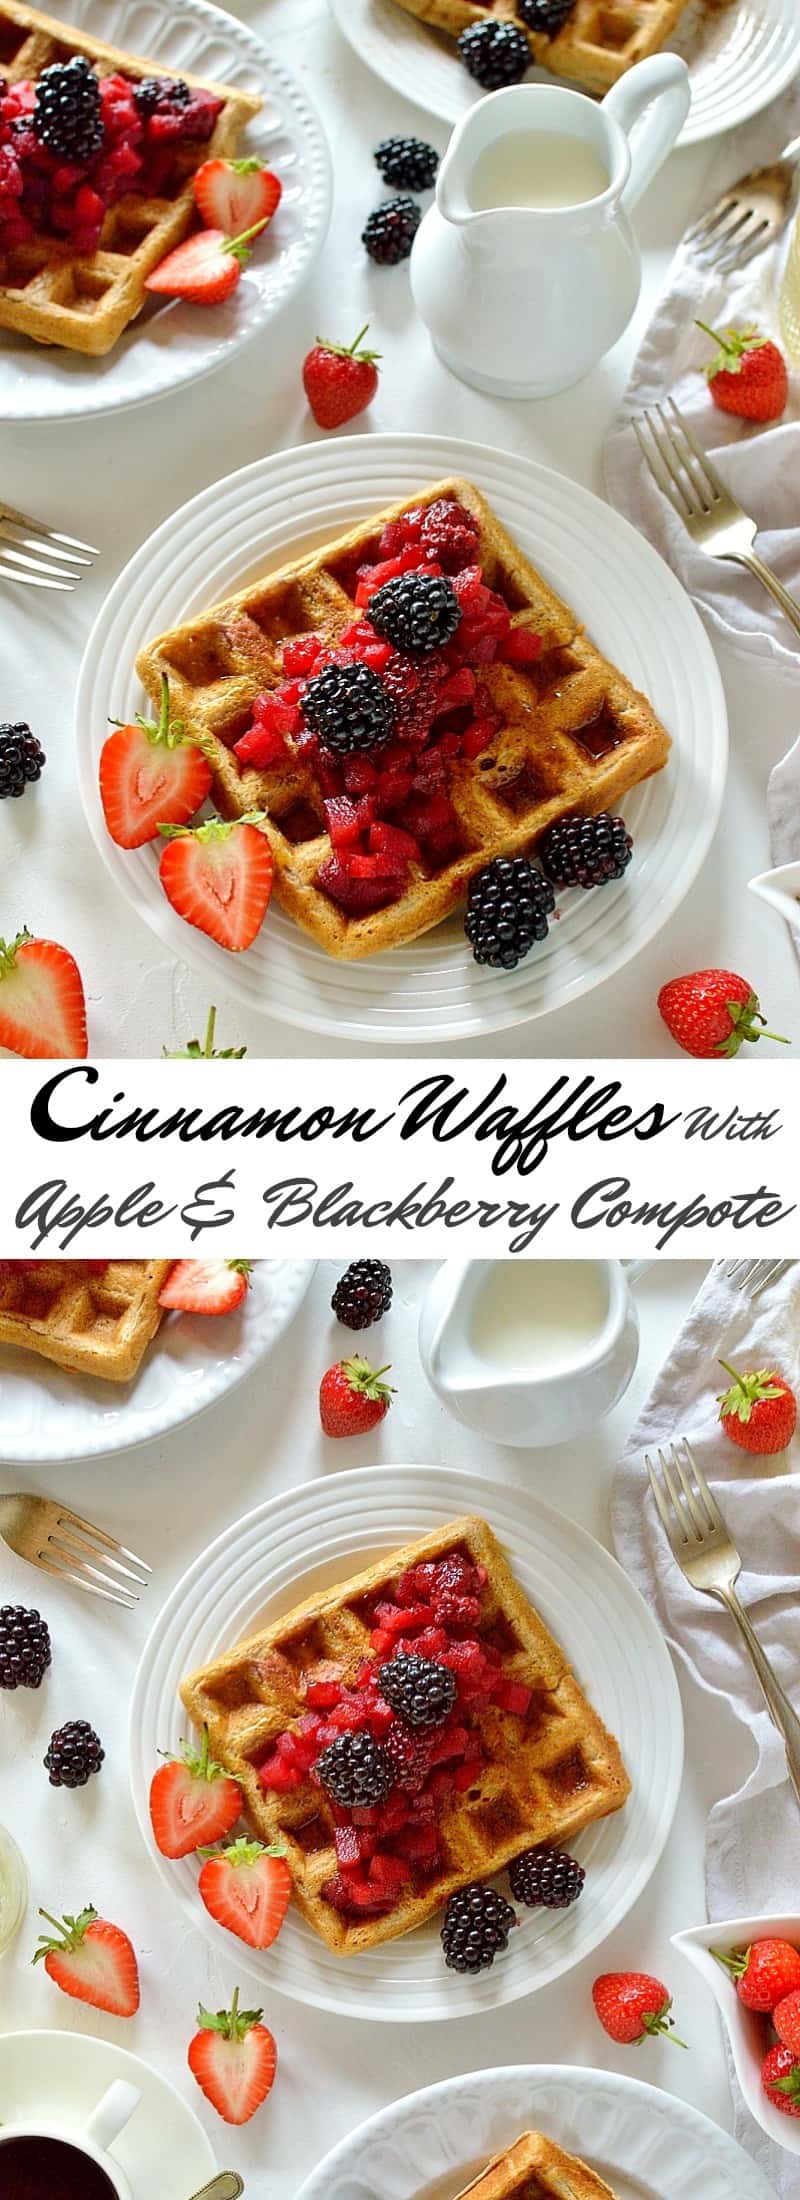 Cinnamon waffles with apple and blackberry compote - perfect for breakfast, brunch or dessert!